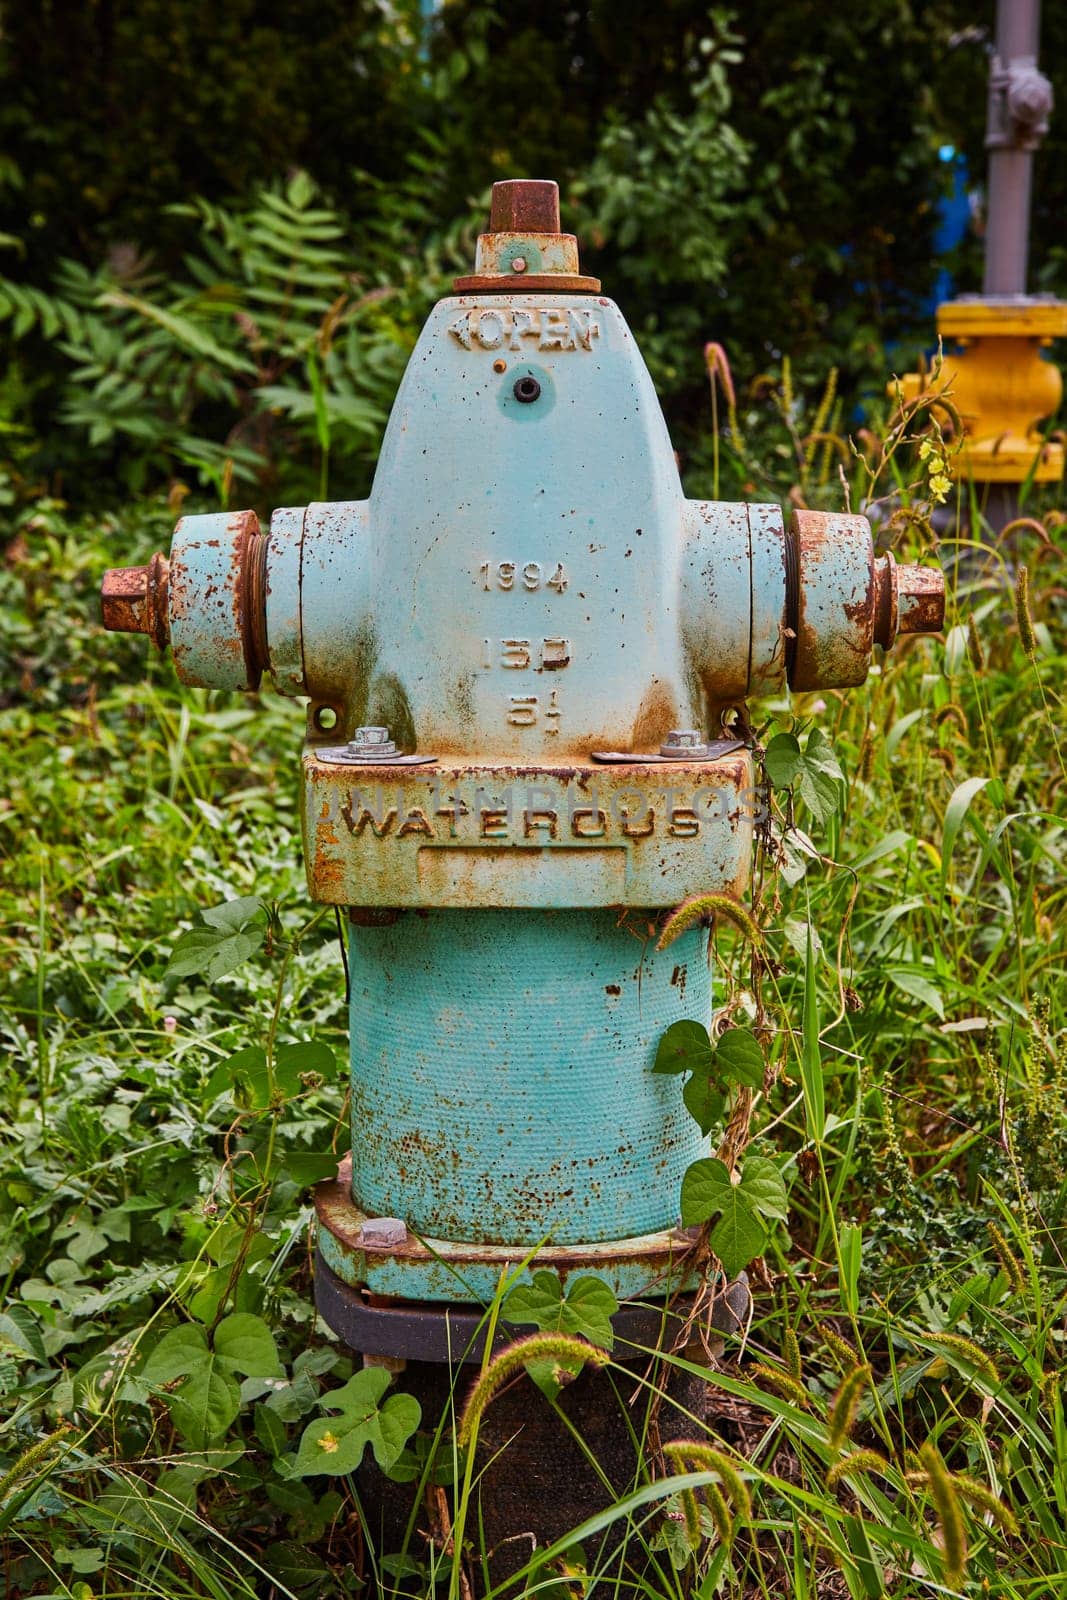 Vintage 1994 Waterous Fire Hydrant in Overgrown Urban Setting, Indianapolis Art Center, Indiana - A Symbol of Neglect and Resilience